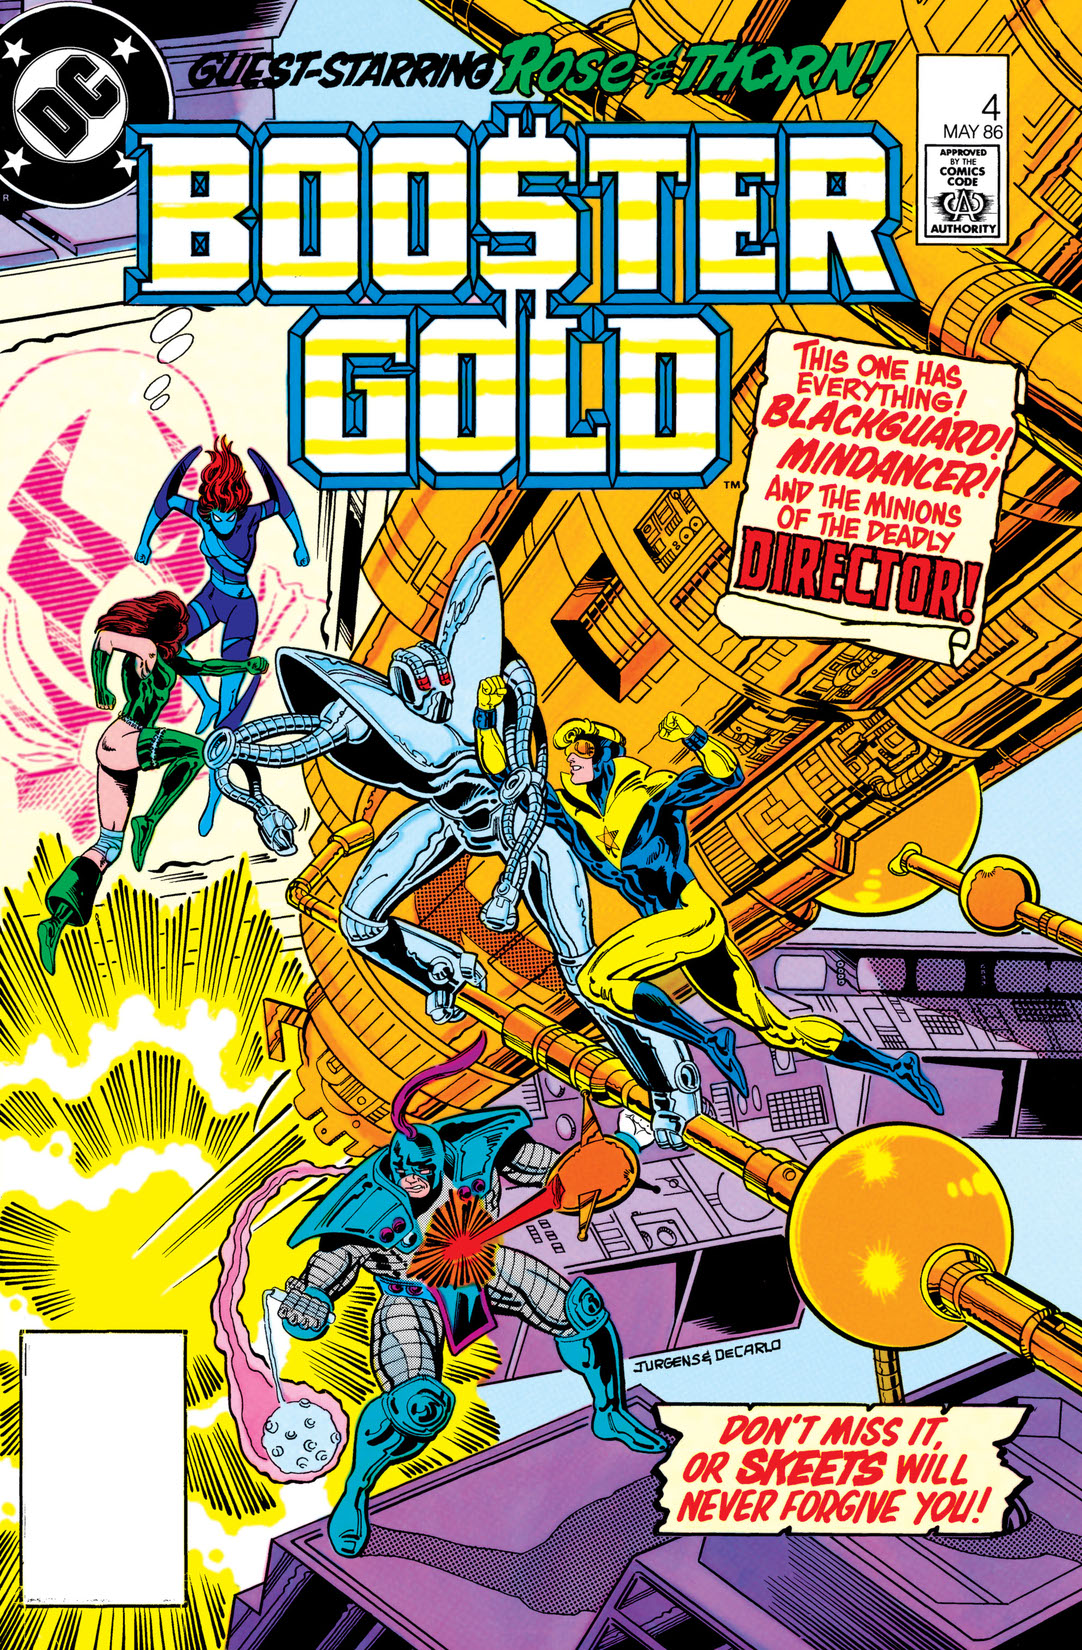 Booster Gold (1985-) #4 preview images